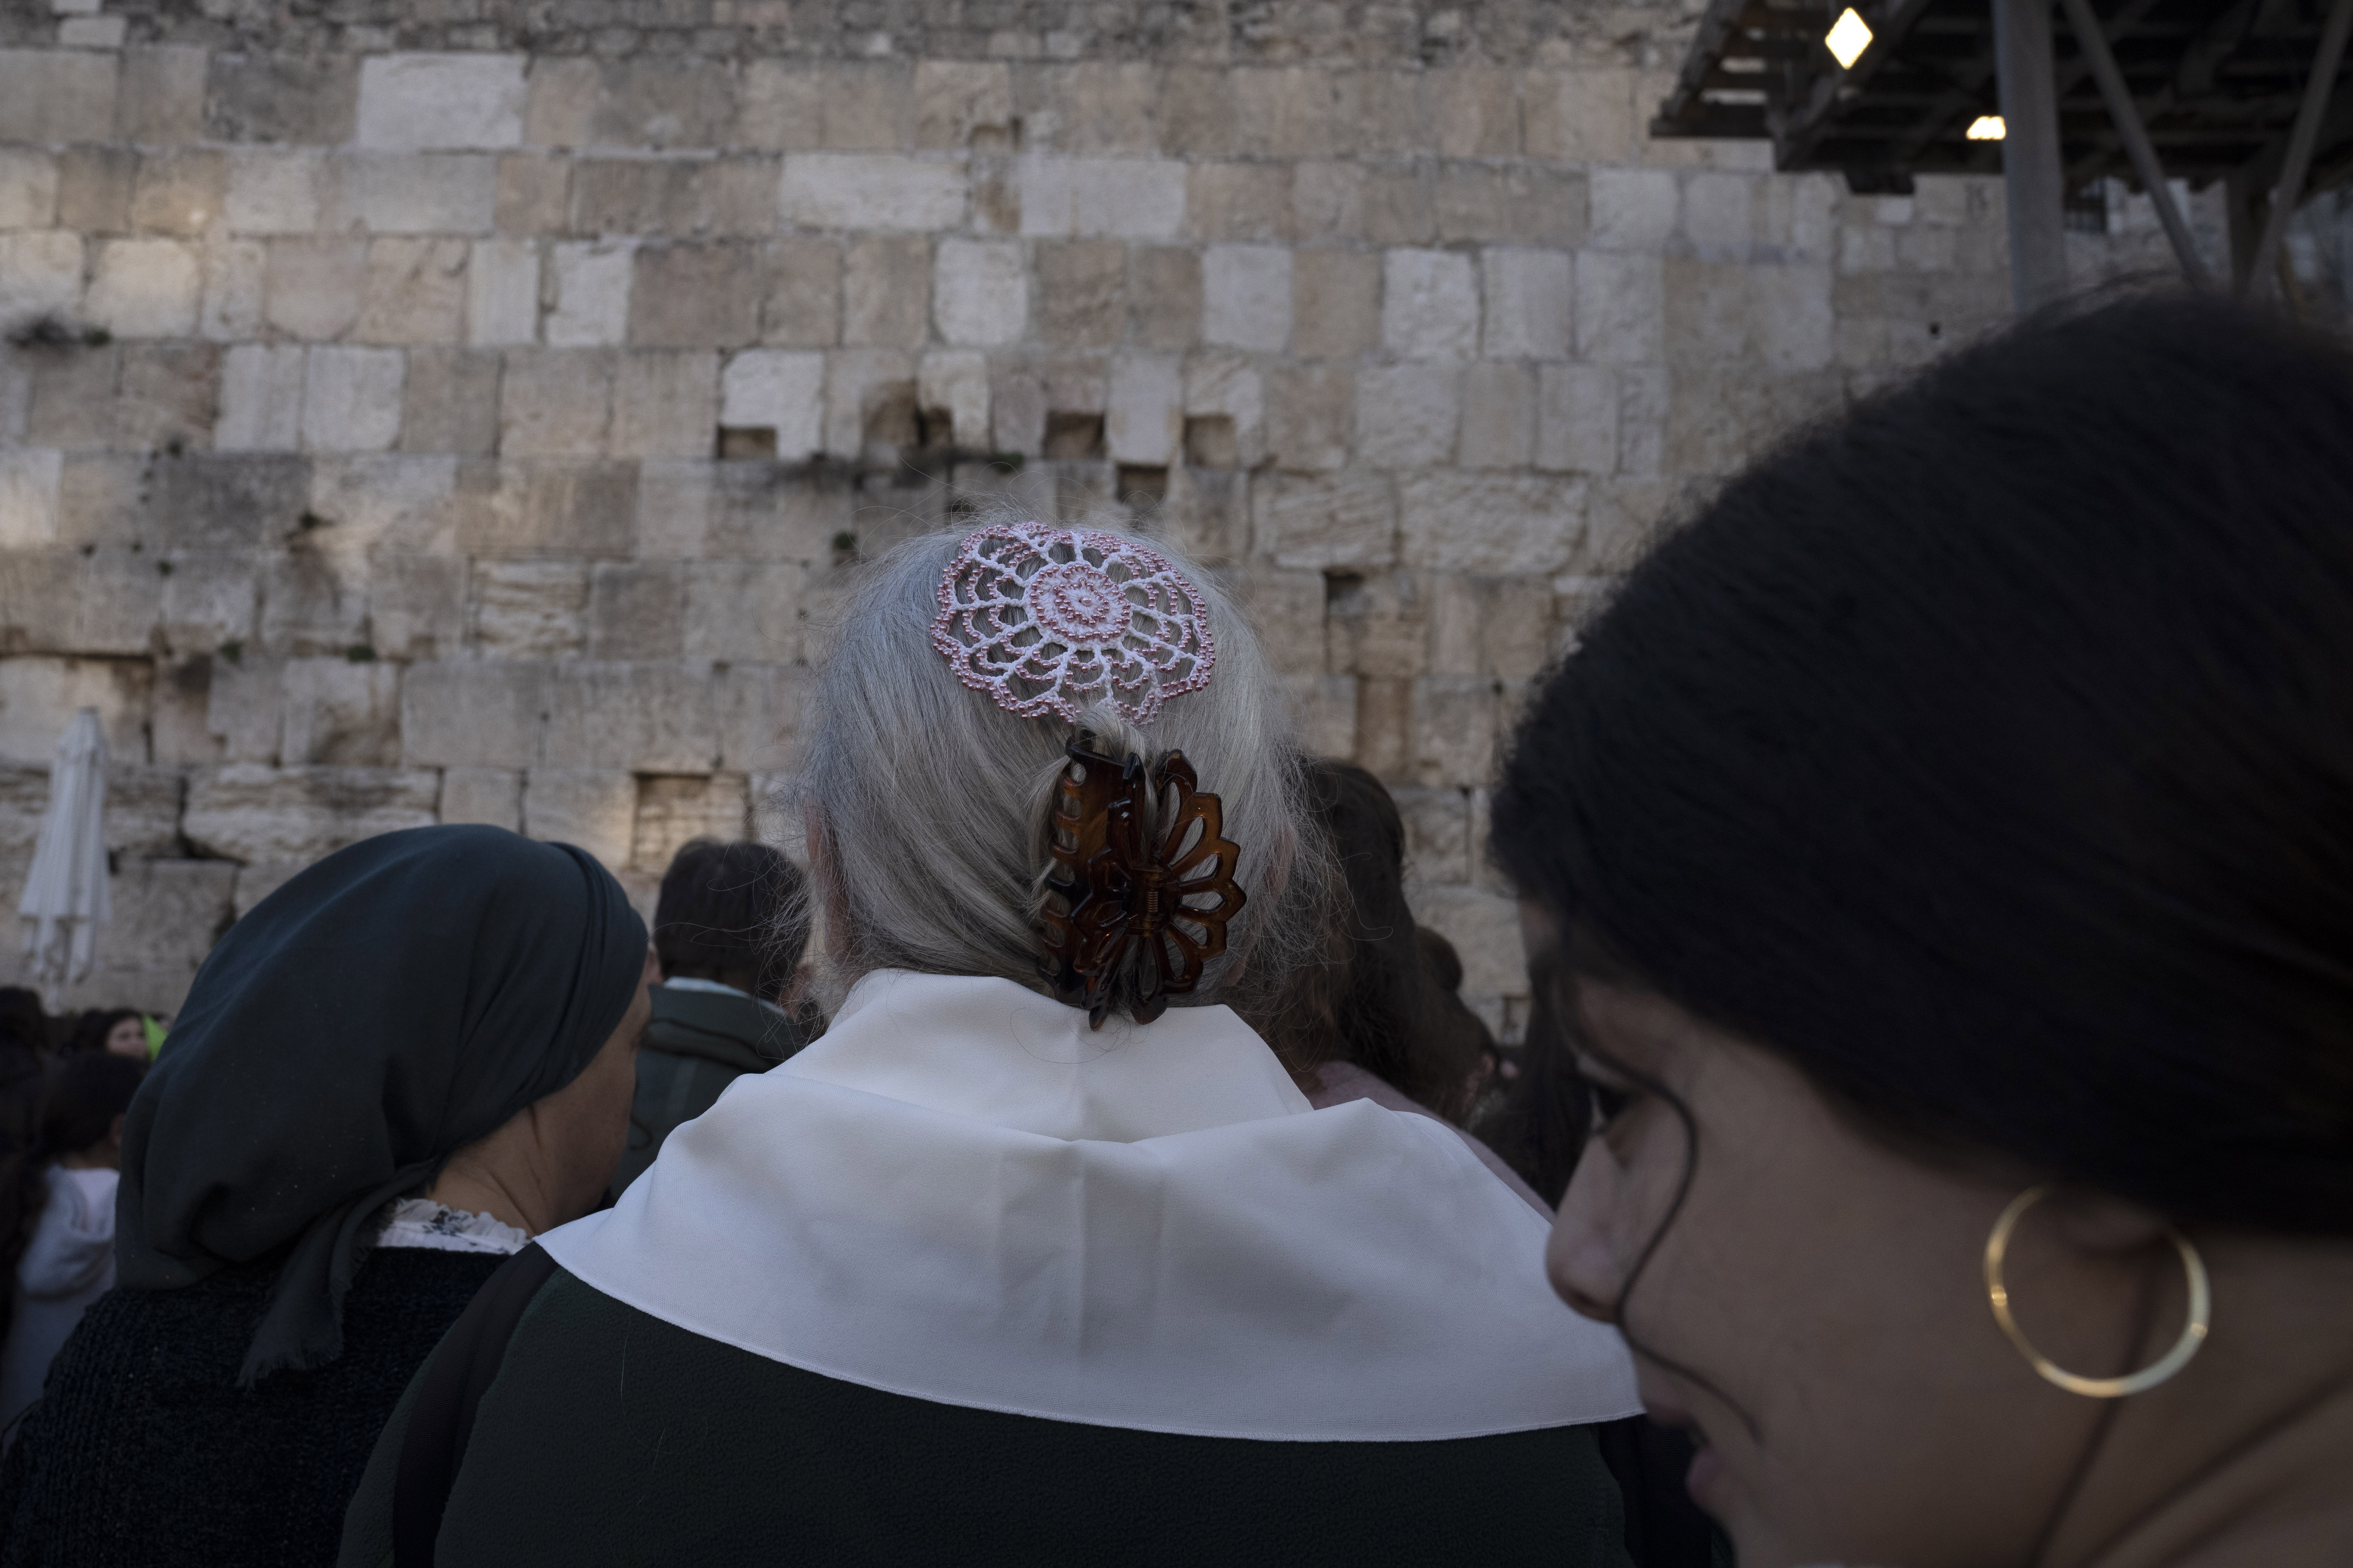 In the photo, a member of Women of the Wall, positioned at the center, dons a headscarf during the Rosh Hodesh prayer, marking the new month. The prayer takes place at the Western Wall, the holiest site where Jews can pray, in Jerusalem's Old City on Monday, Jan. 23, 2023. The Women of the Wall group has been engaged in a decadeslong campaign for gender equality at the holy site and now faces new challenges under Israel's right-wing government. (AP photo/Maya Alleruzzo)